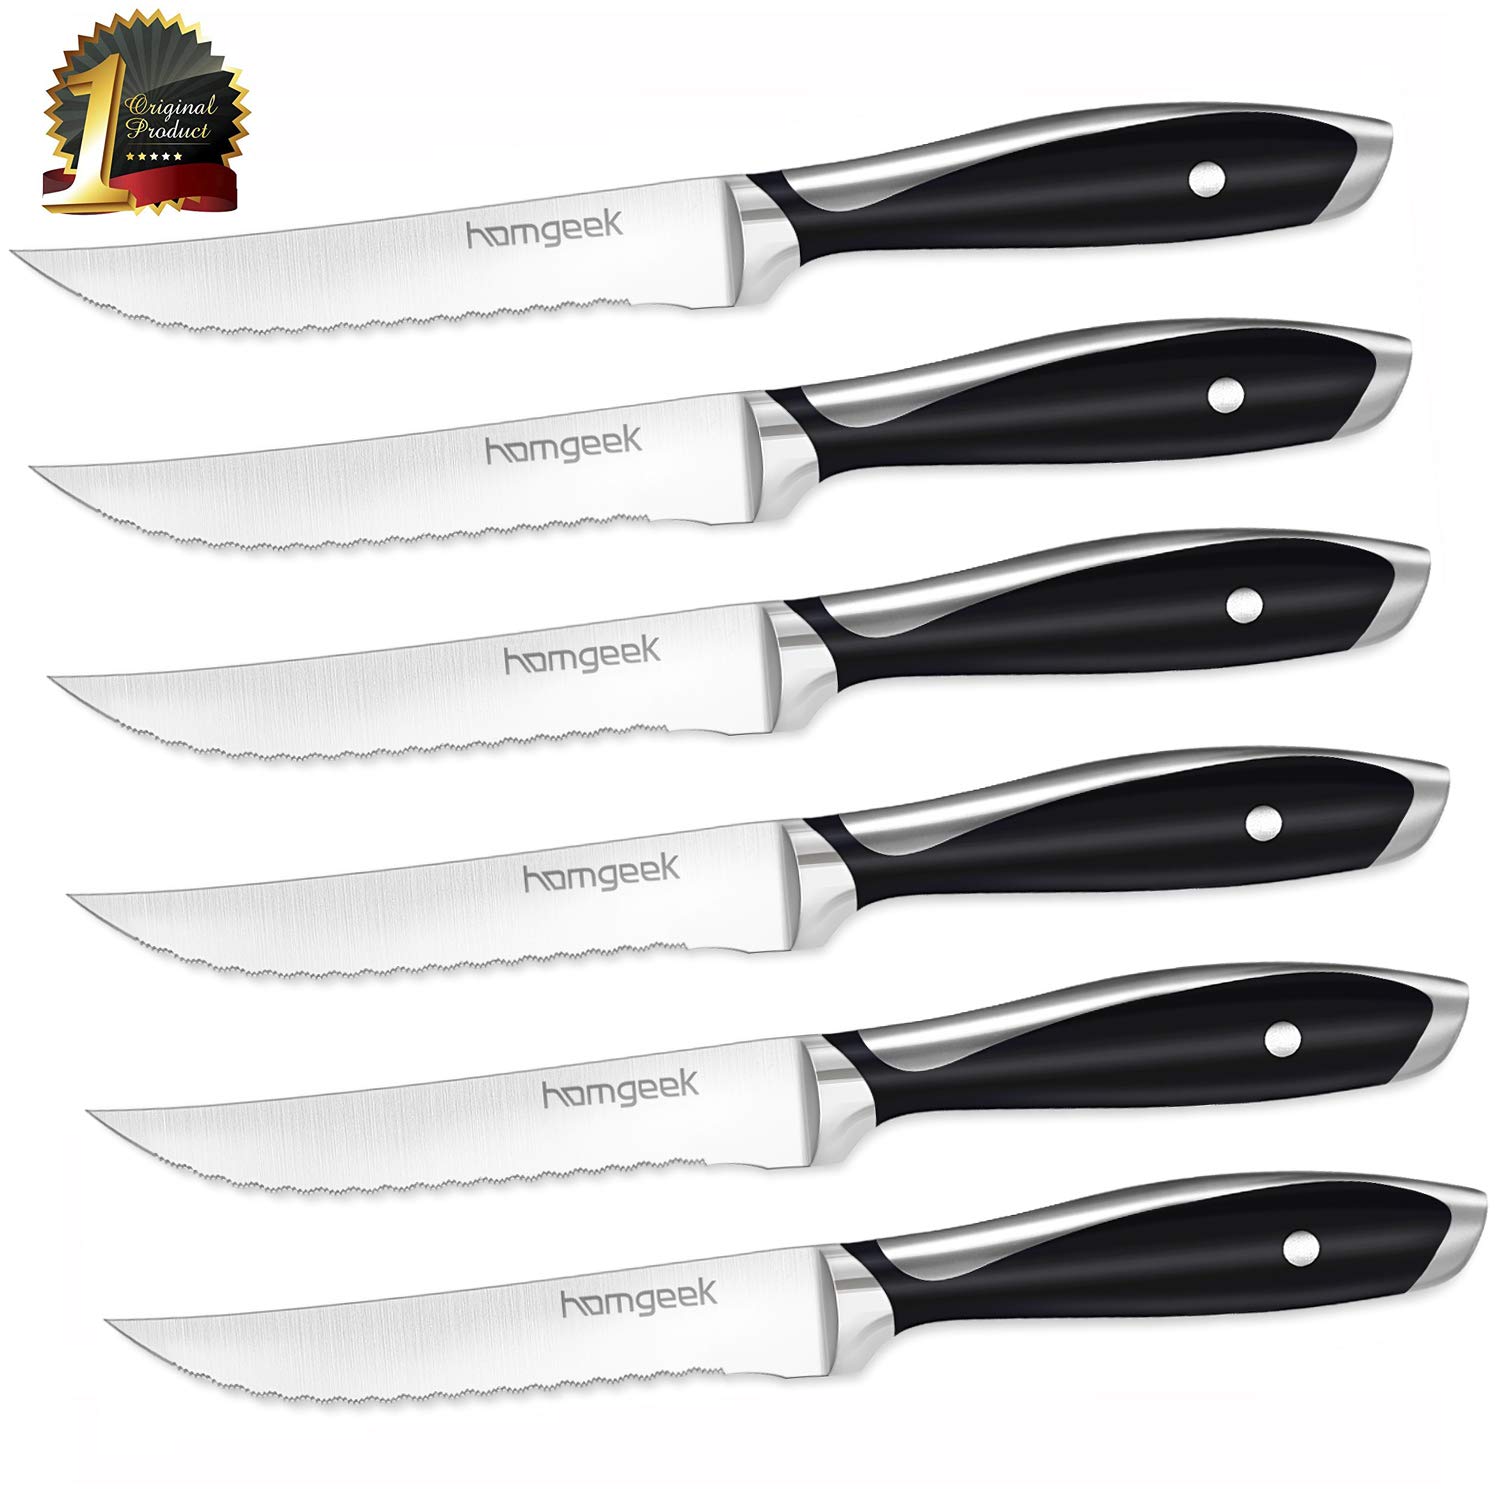 Which Is The Best Cuisinart Steak Knives Set Of 8